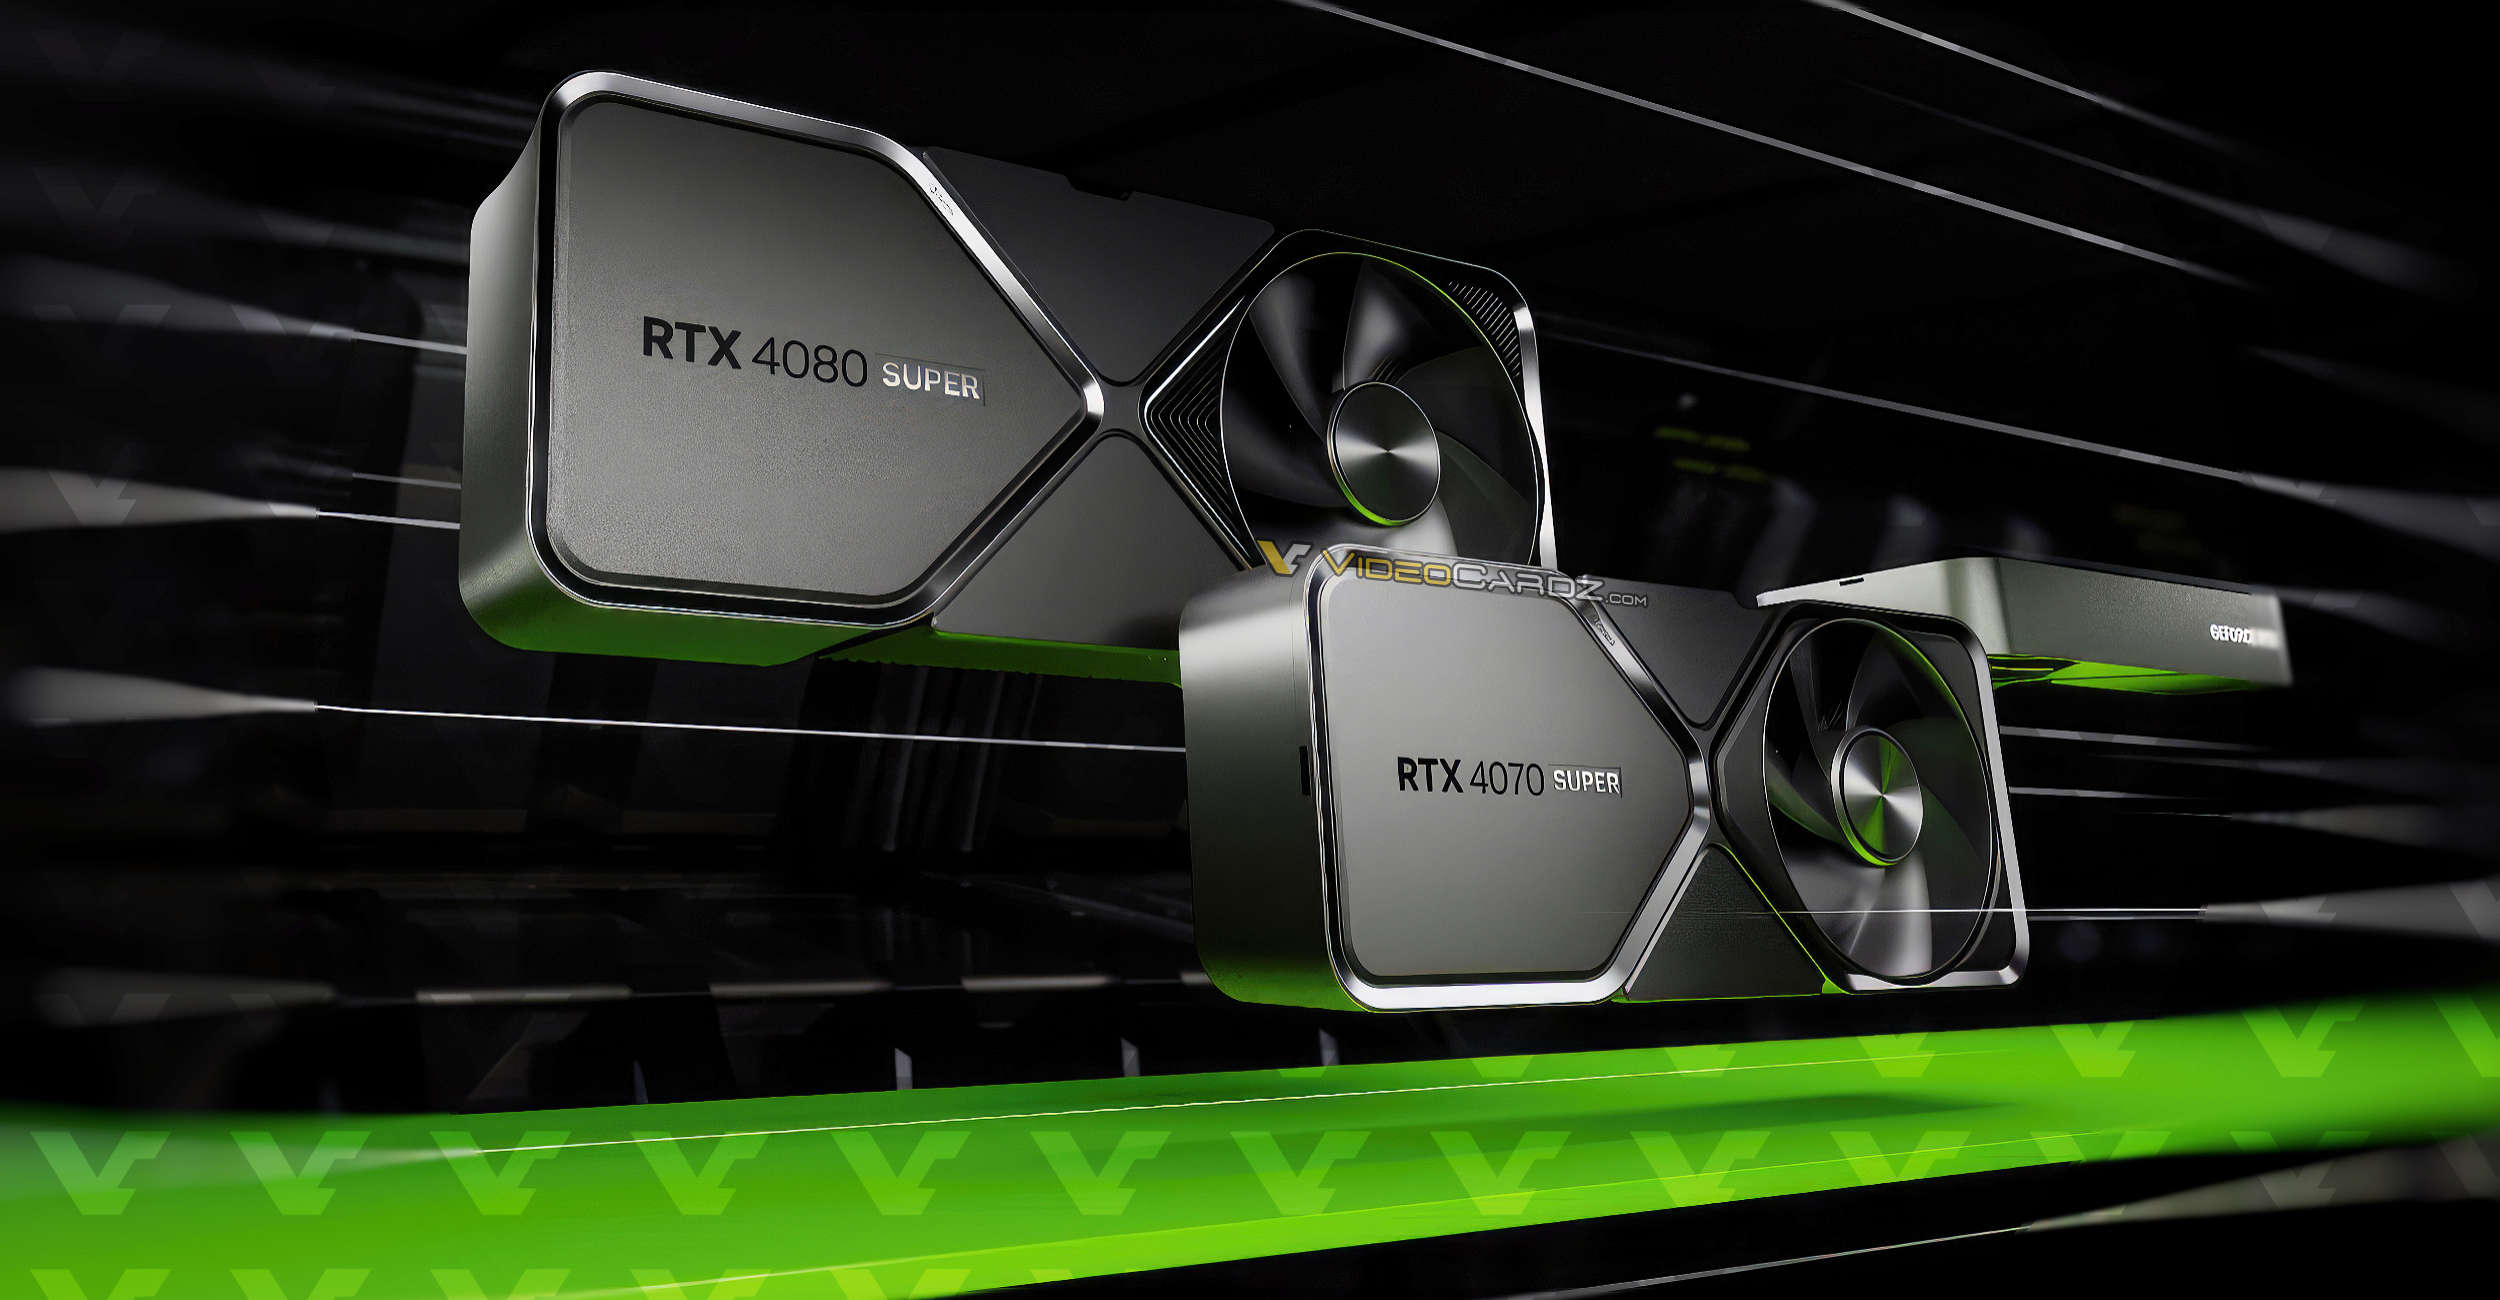 NVIDIA launches GeForce RTX 40 SUPER series at $999 RTX 4080S, $799 RTX 4070 TiS, and $599 RTX 4070S